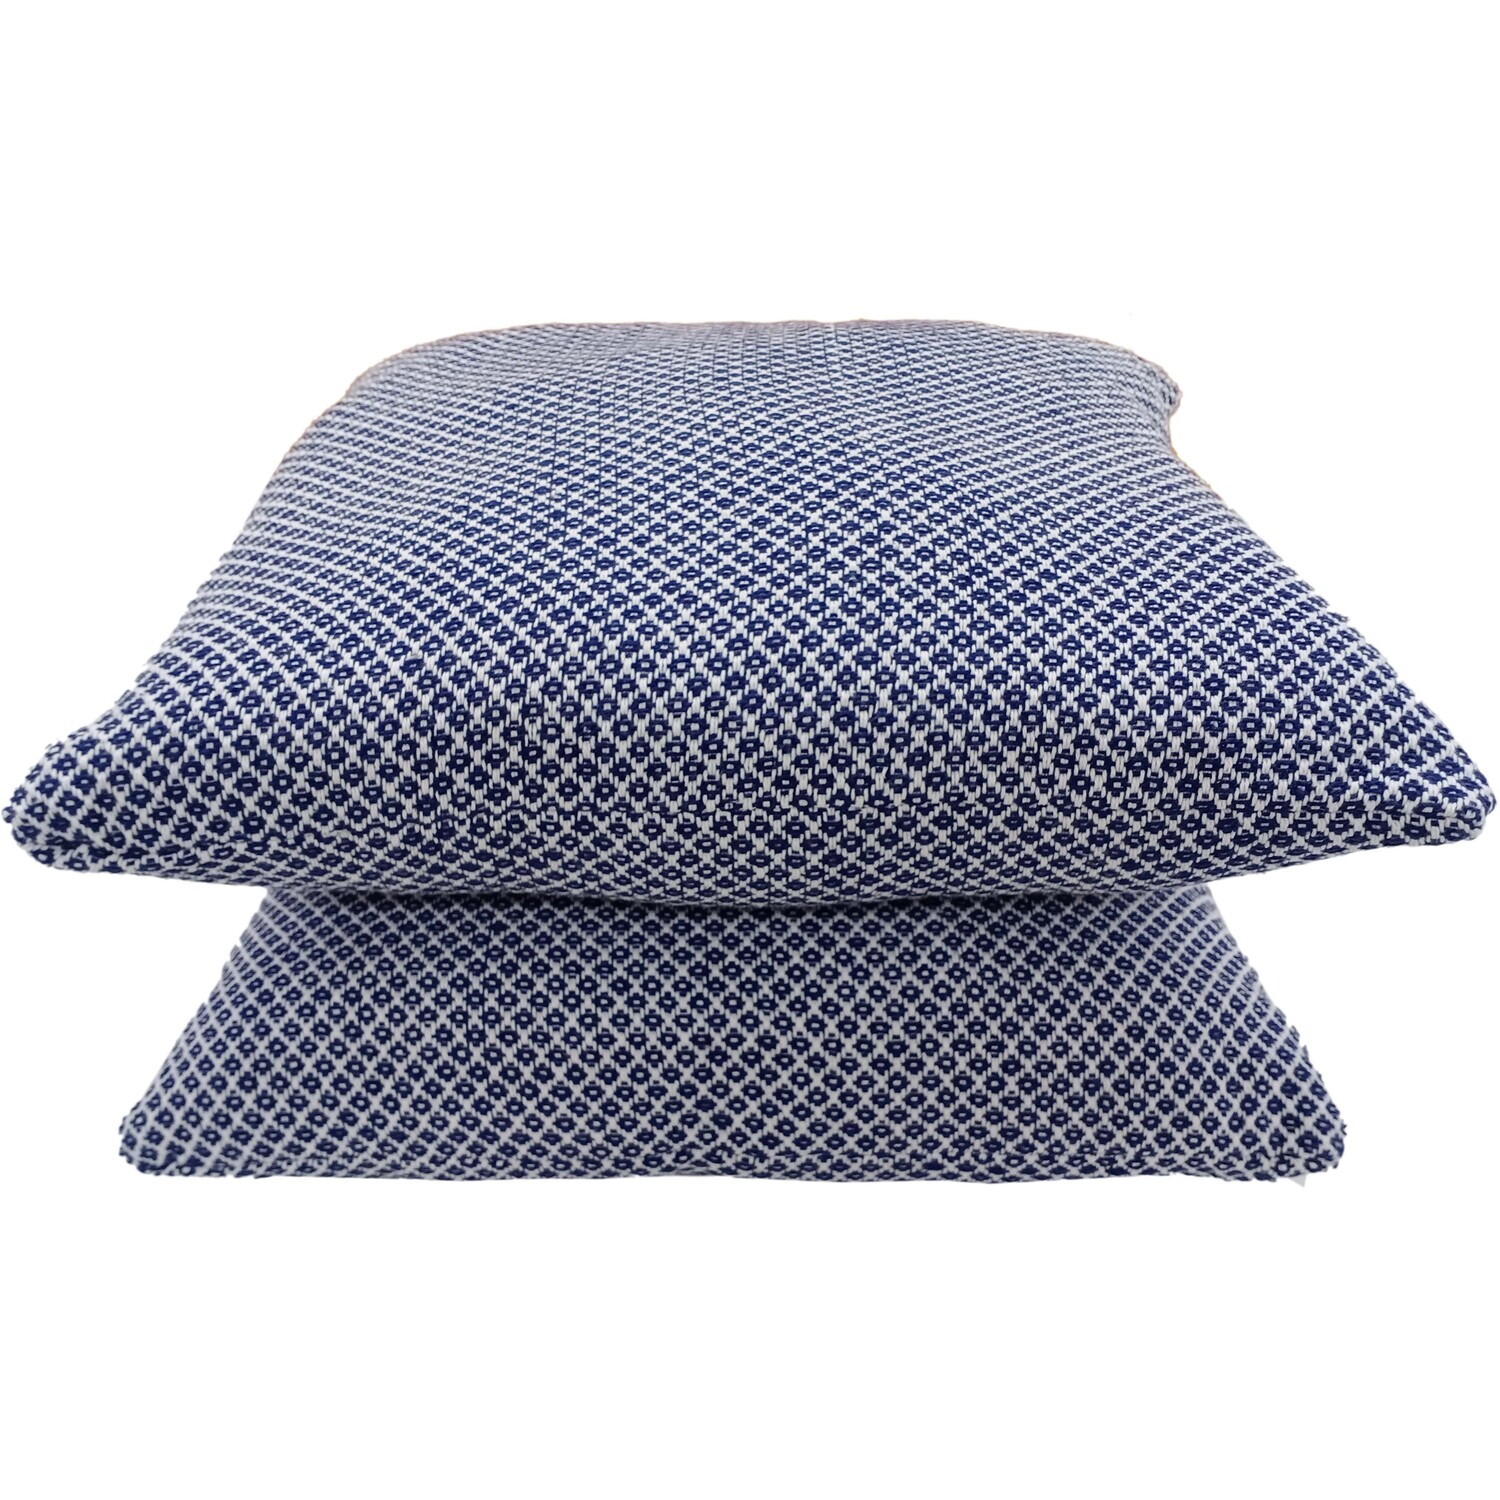 Pack of 2 Geometric Cushions - Navy Image 2